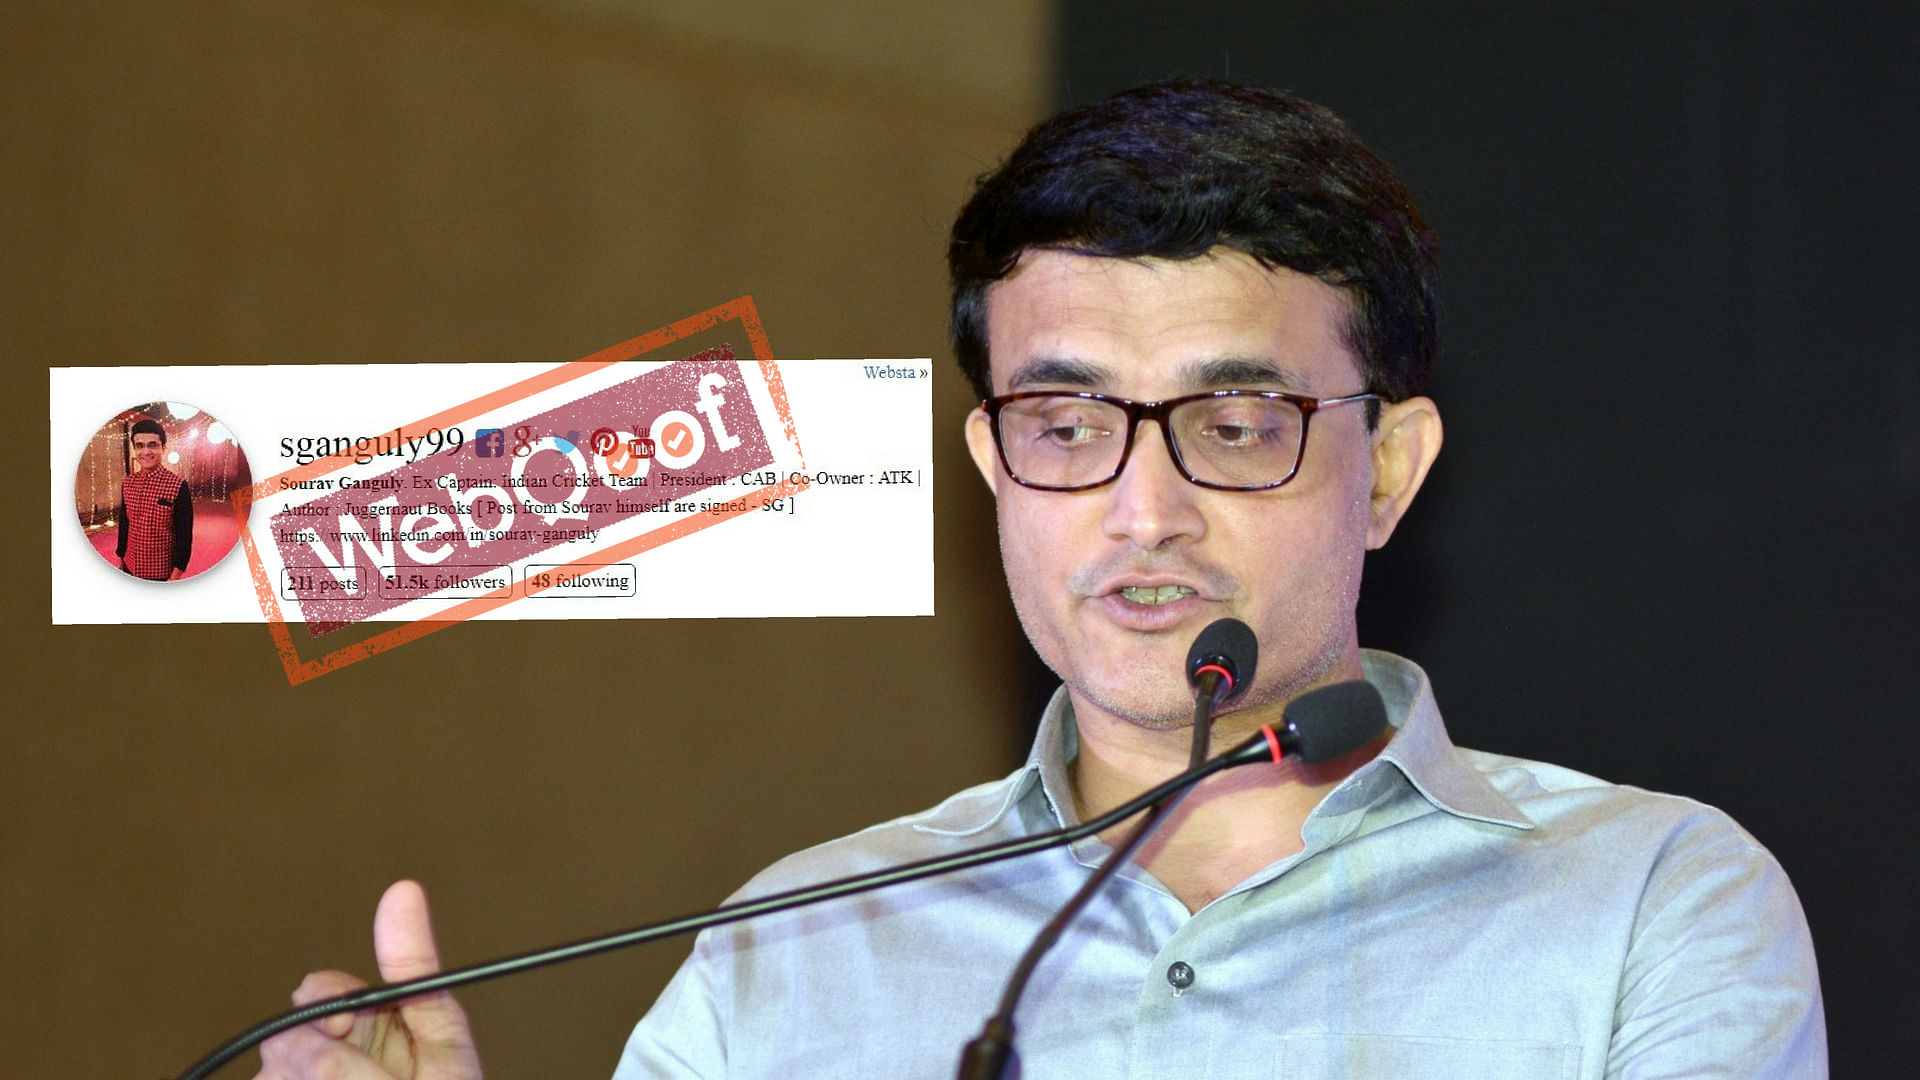 Sourav Ganguly took to Twitter to clarify that the unverified Instagram account is not his.&nbsp;